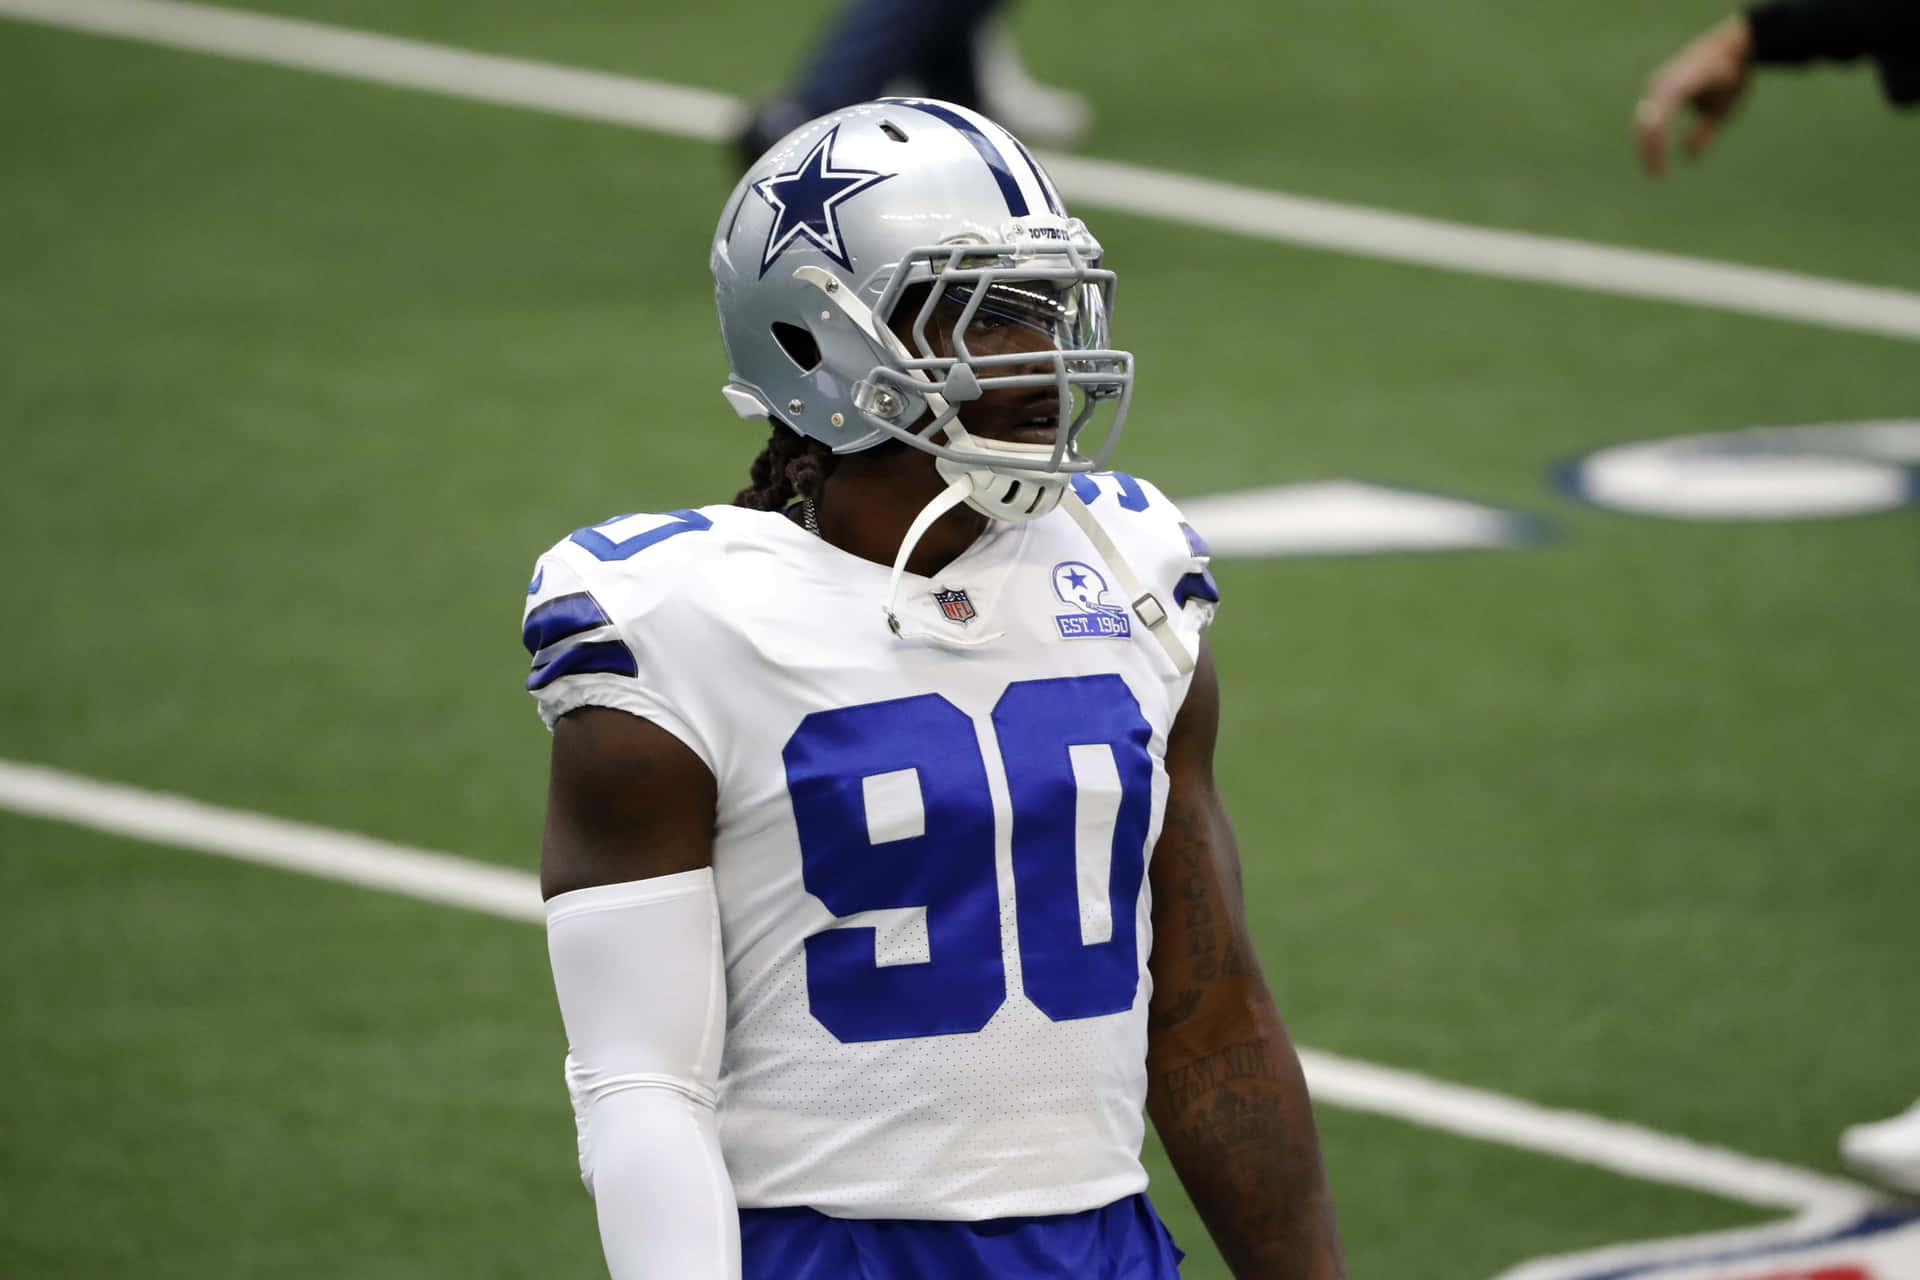 Demarcus Lawrence 3072 X 2048 Wallpaper